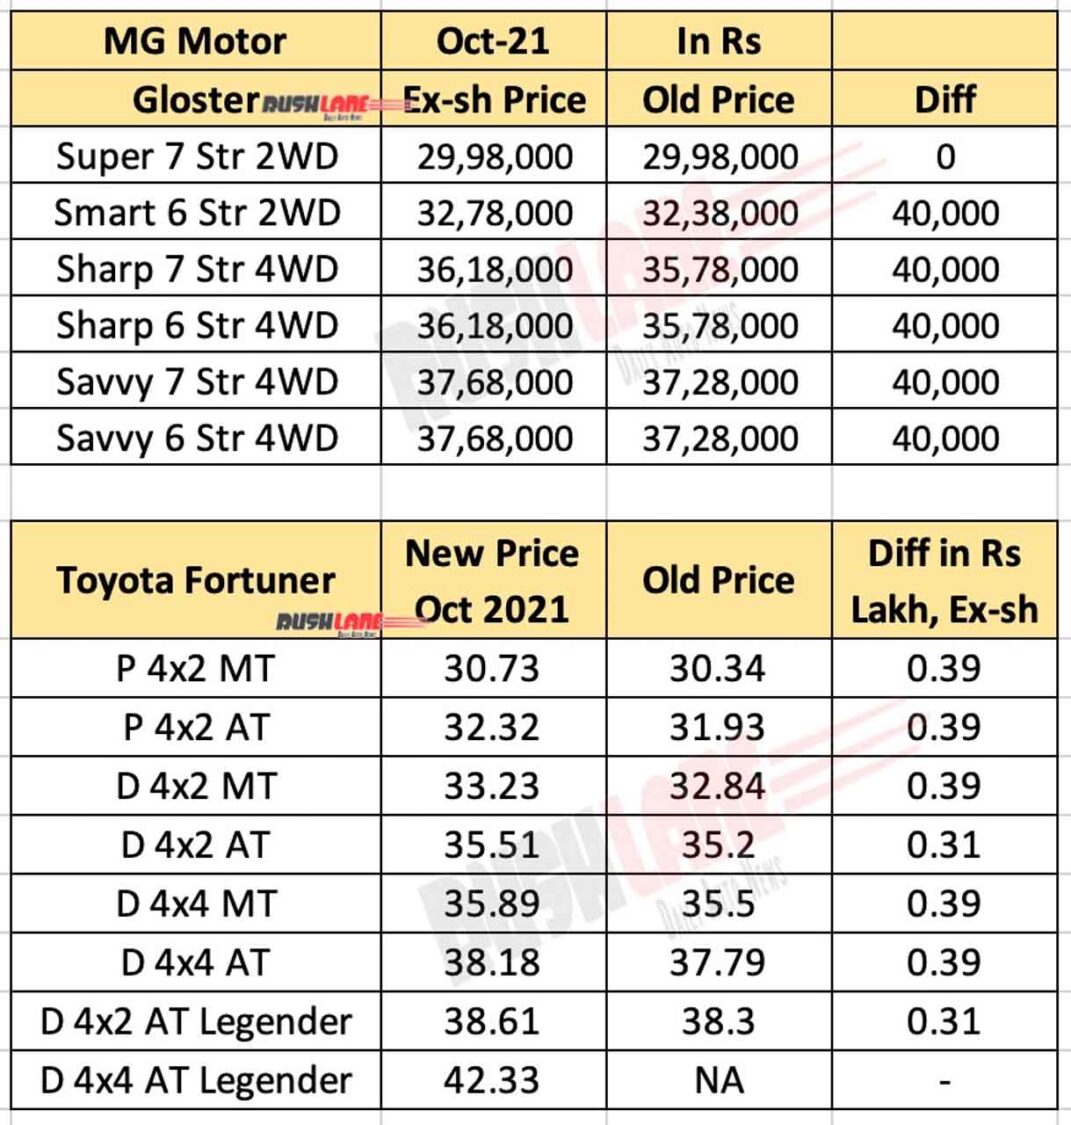 MG Gloster vs Toyota Fortuner - Oct 2021 Prices